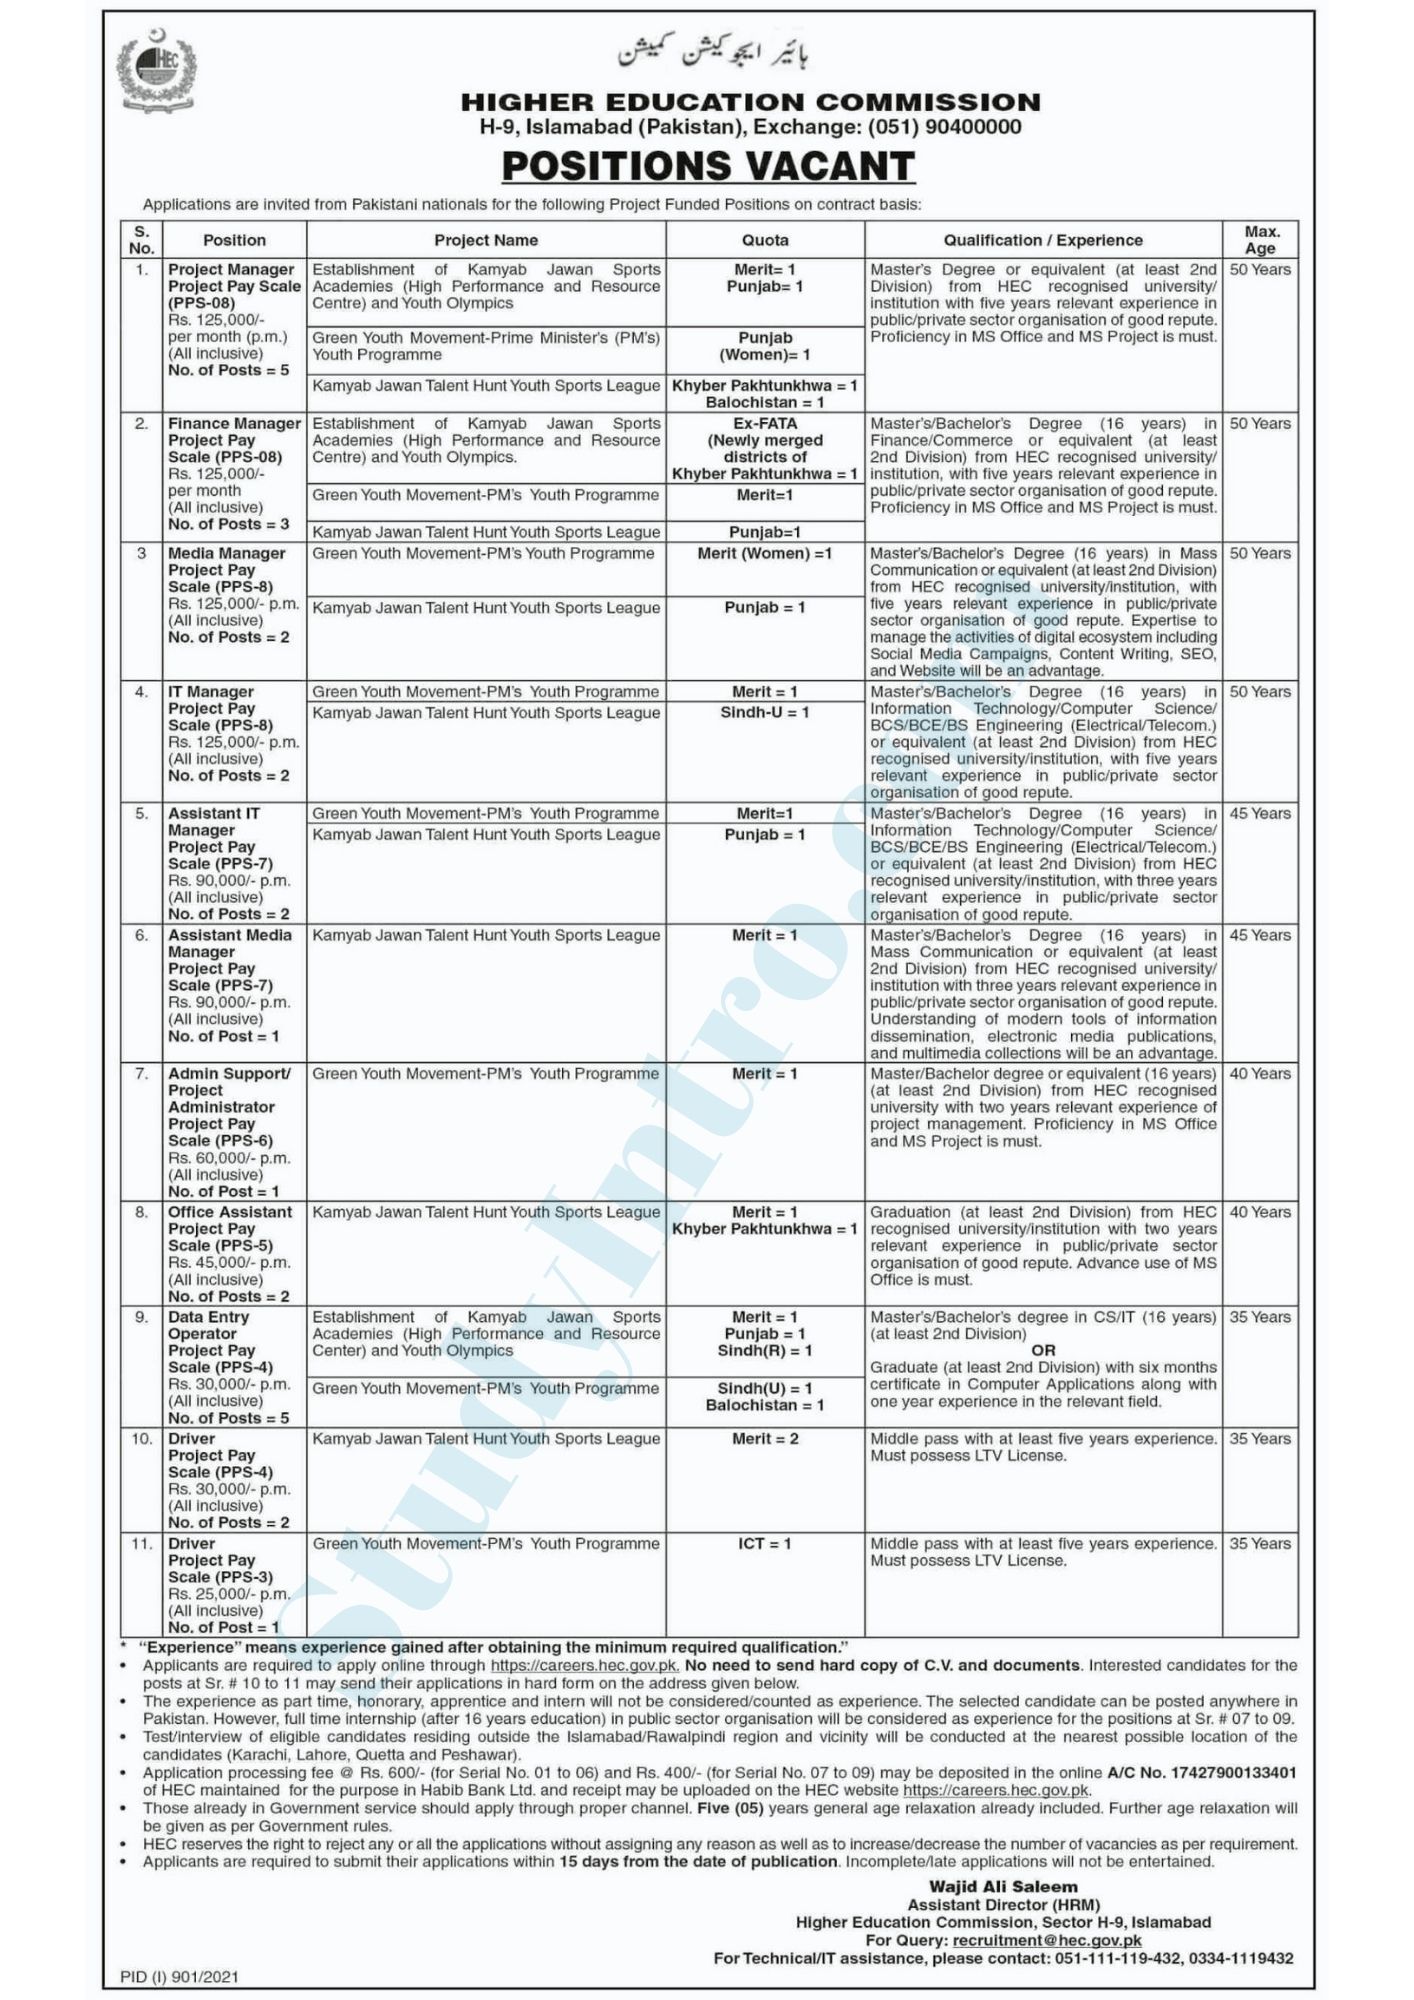 Government Jobs in HEC Department 2021